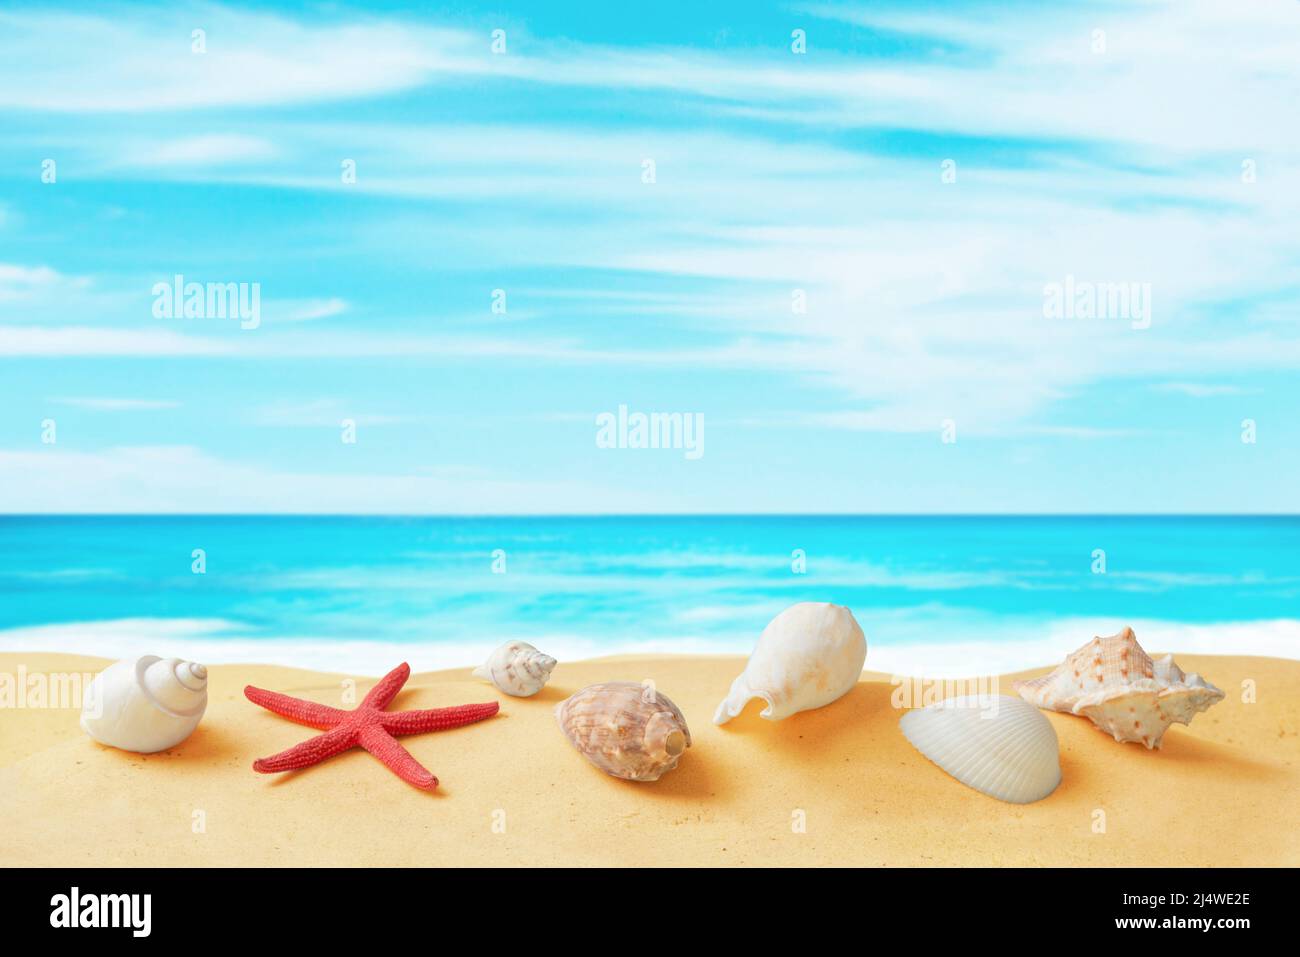 Shells and sea star on beach sand with clean sea and sky in background. Tropical travel composition with copy space Stock Photo